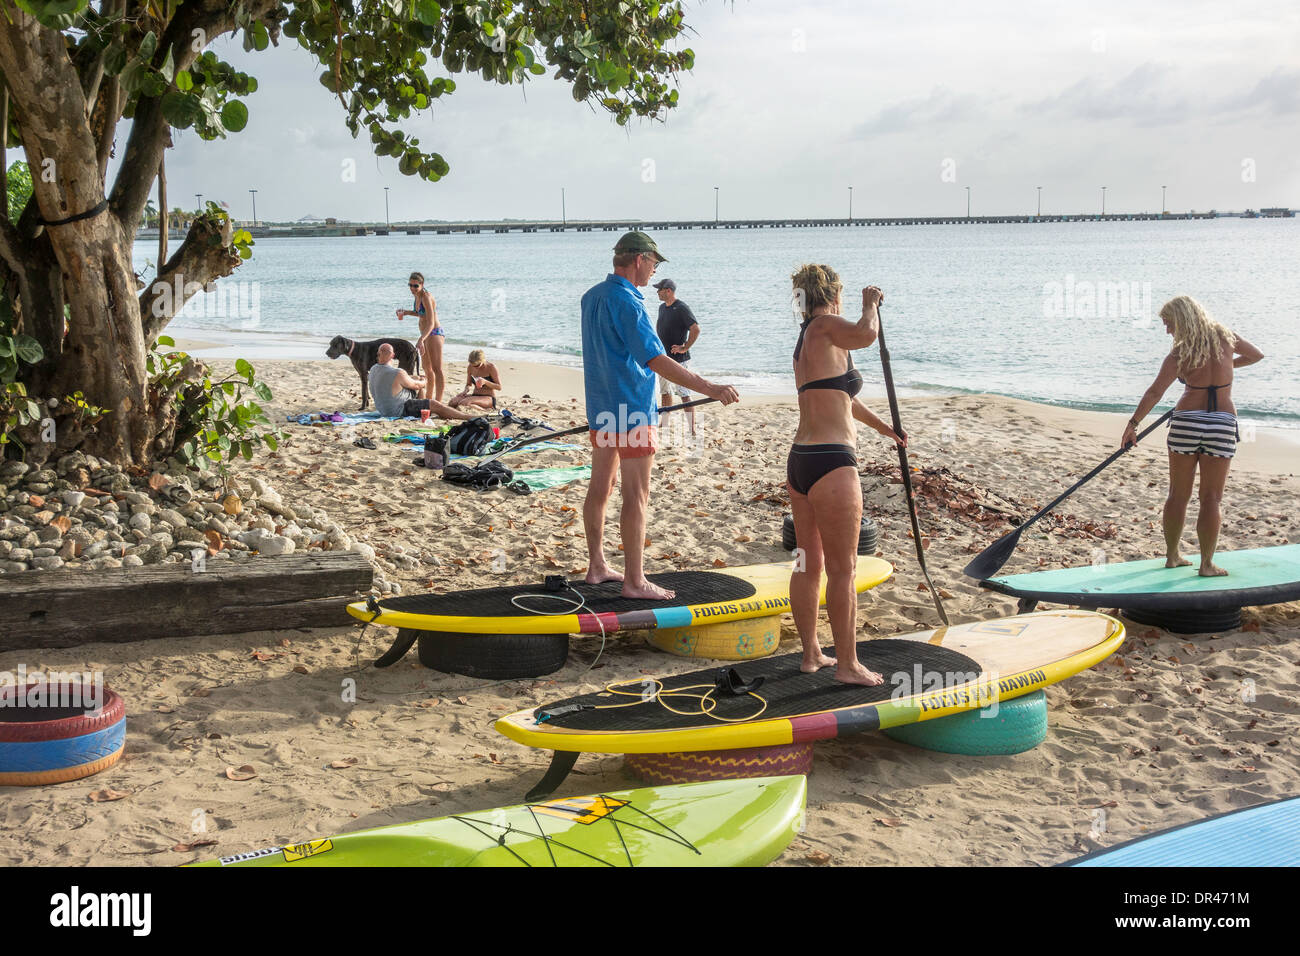 A female instructor instructs customers in the use of stand-up paddle boards on St. Croix, U.S. Virgin Islands. Stock Photo